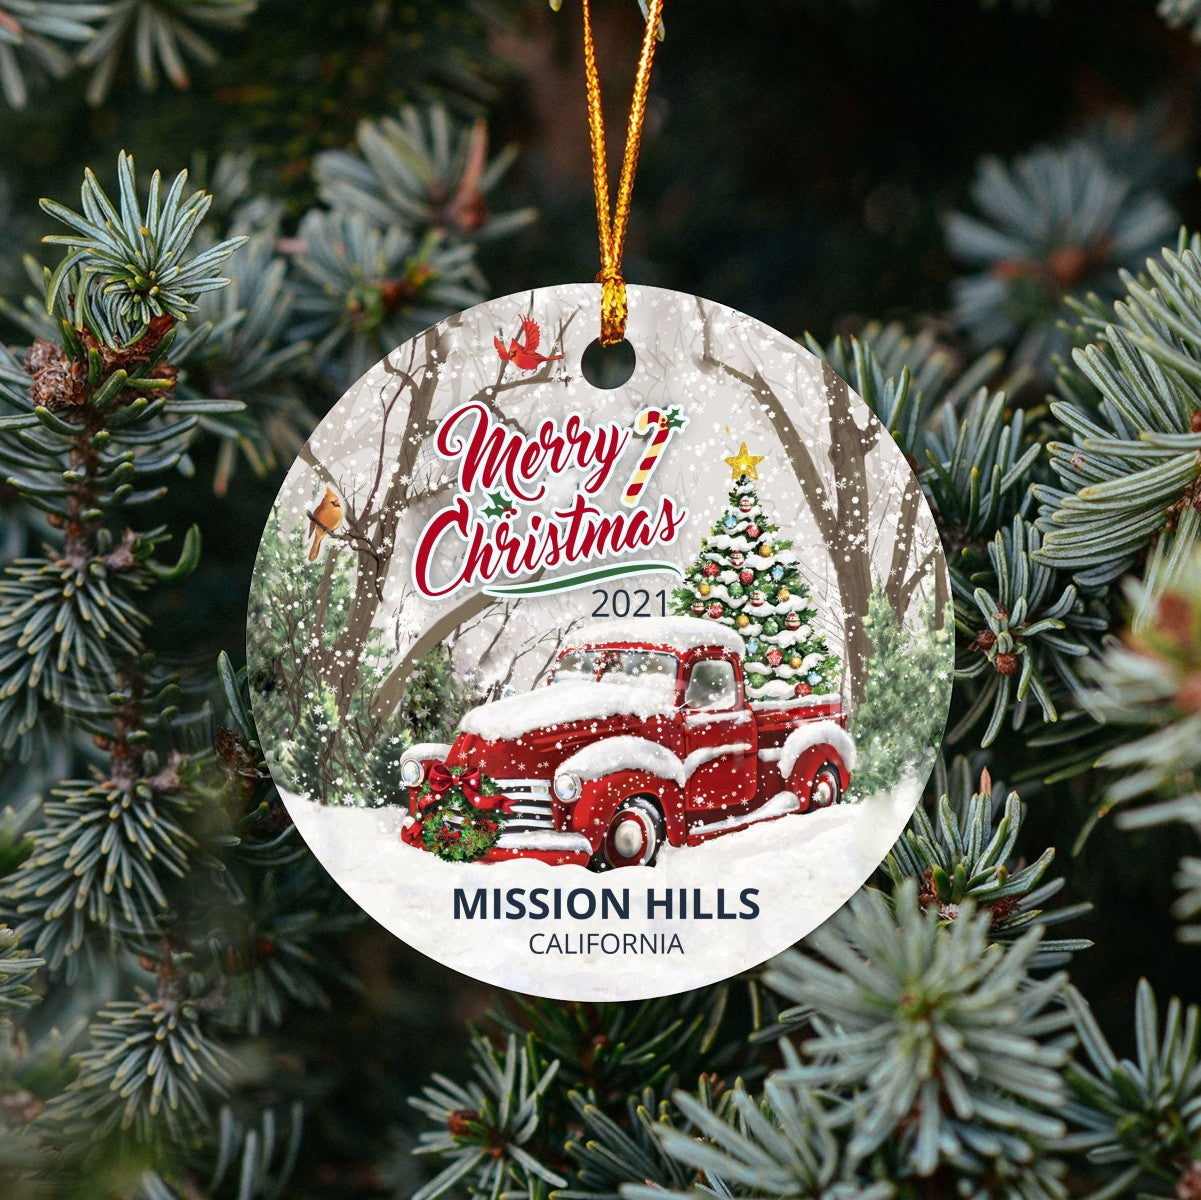 Christmas Tree Ornaments Mission Hills - Ornament With Name City, State Mission Hills California CA Ornament - Red Truck Xmas Ornaments 3'' Plastic Gift For Family, Friend And Housewarming